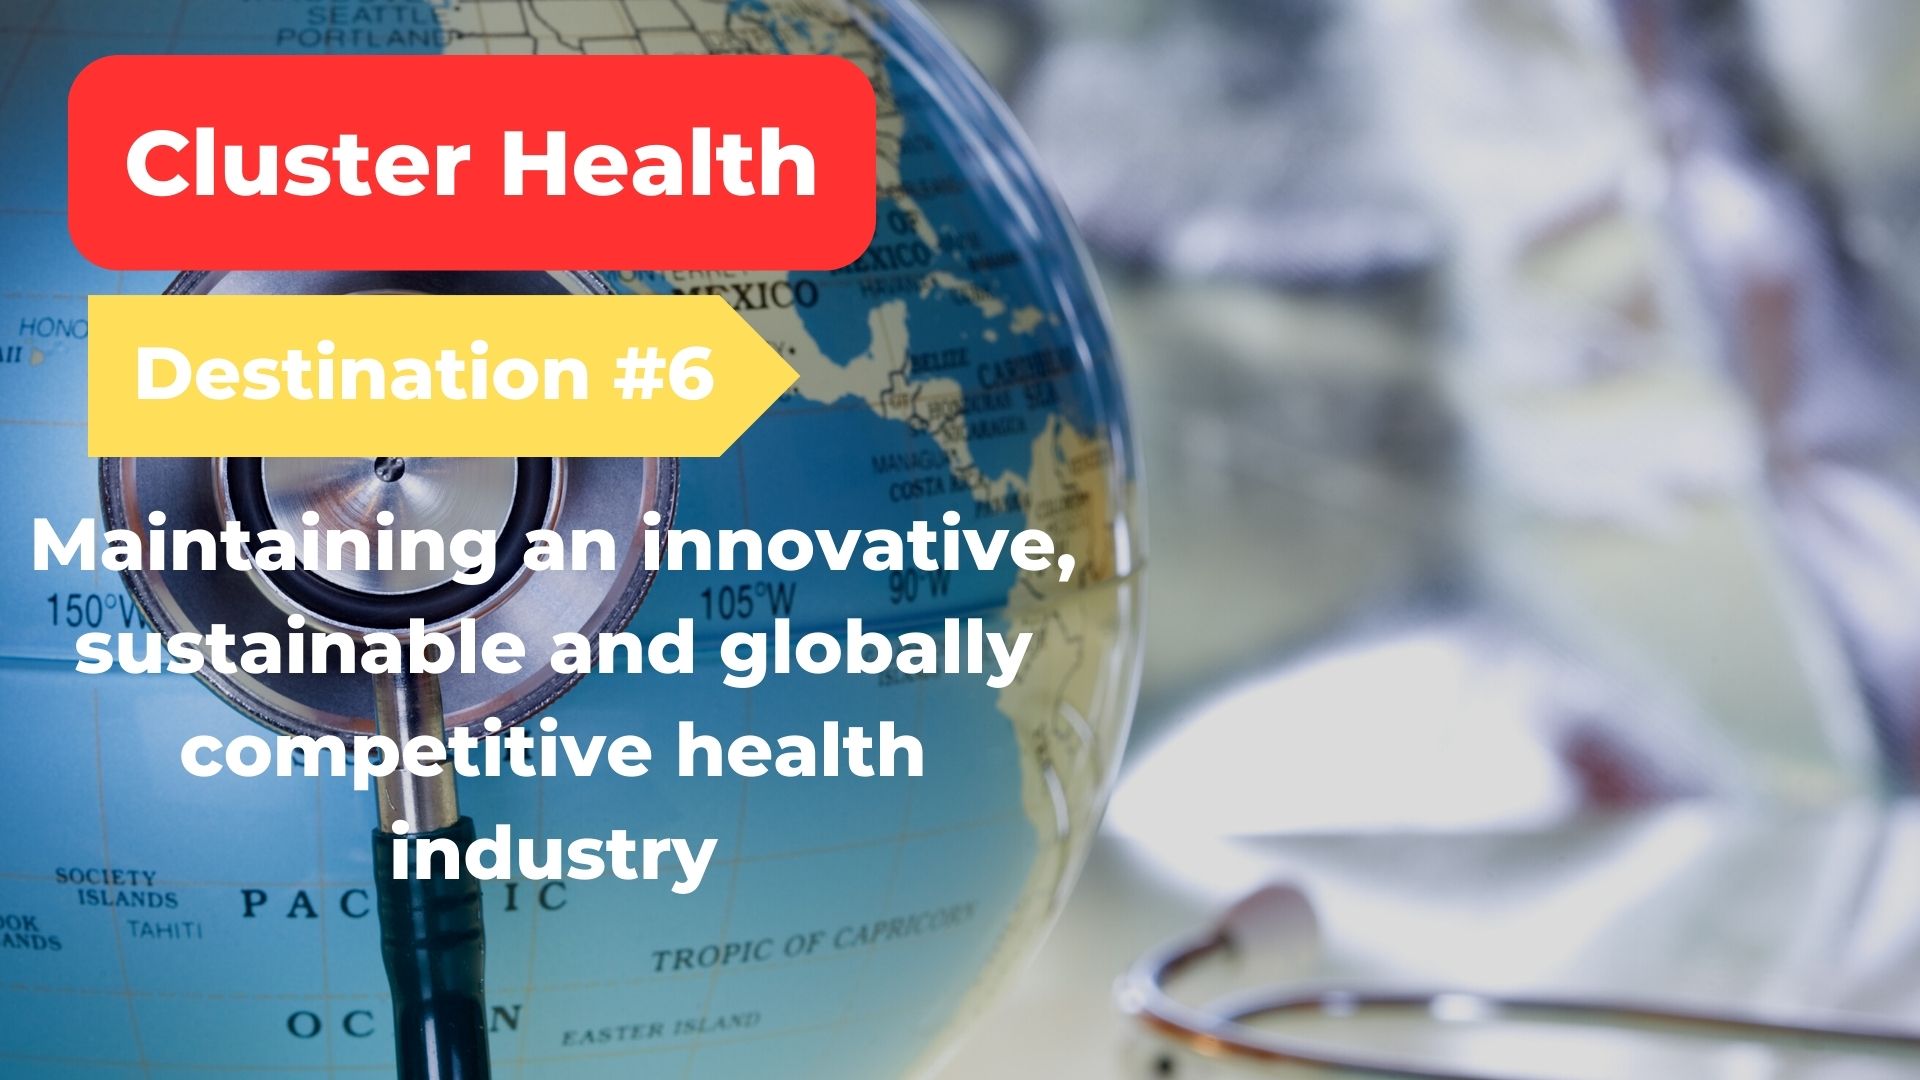 CLUSTER 1 – HEALTH | Destination #6: Maintaining an innovative, sustainable, and globally competitive health industry